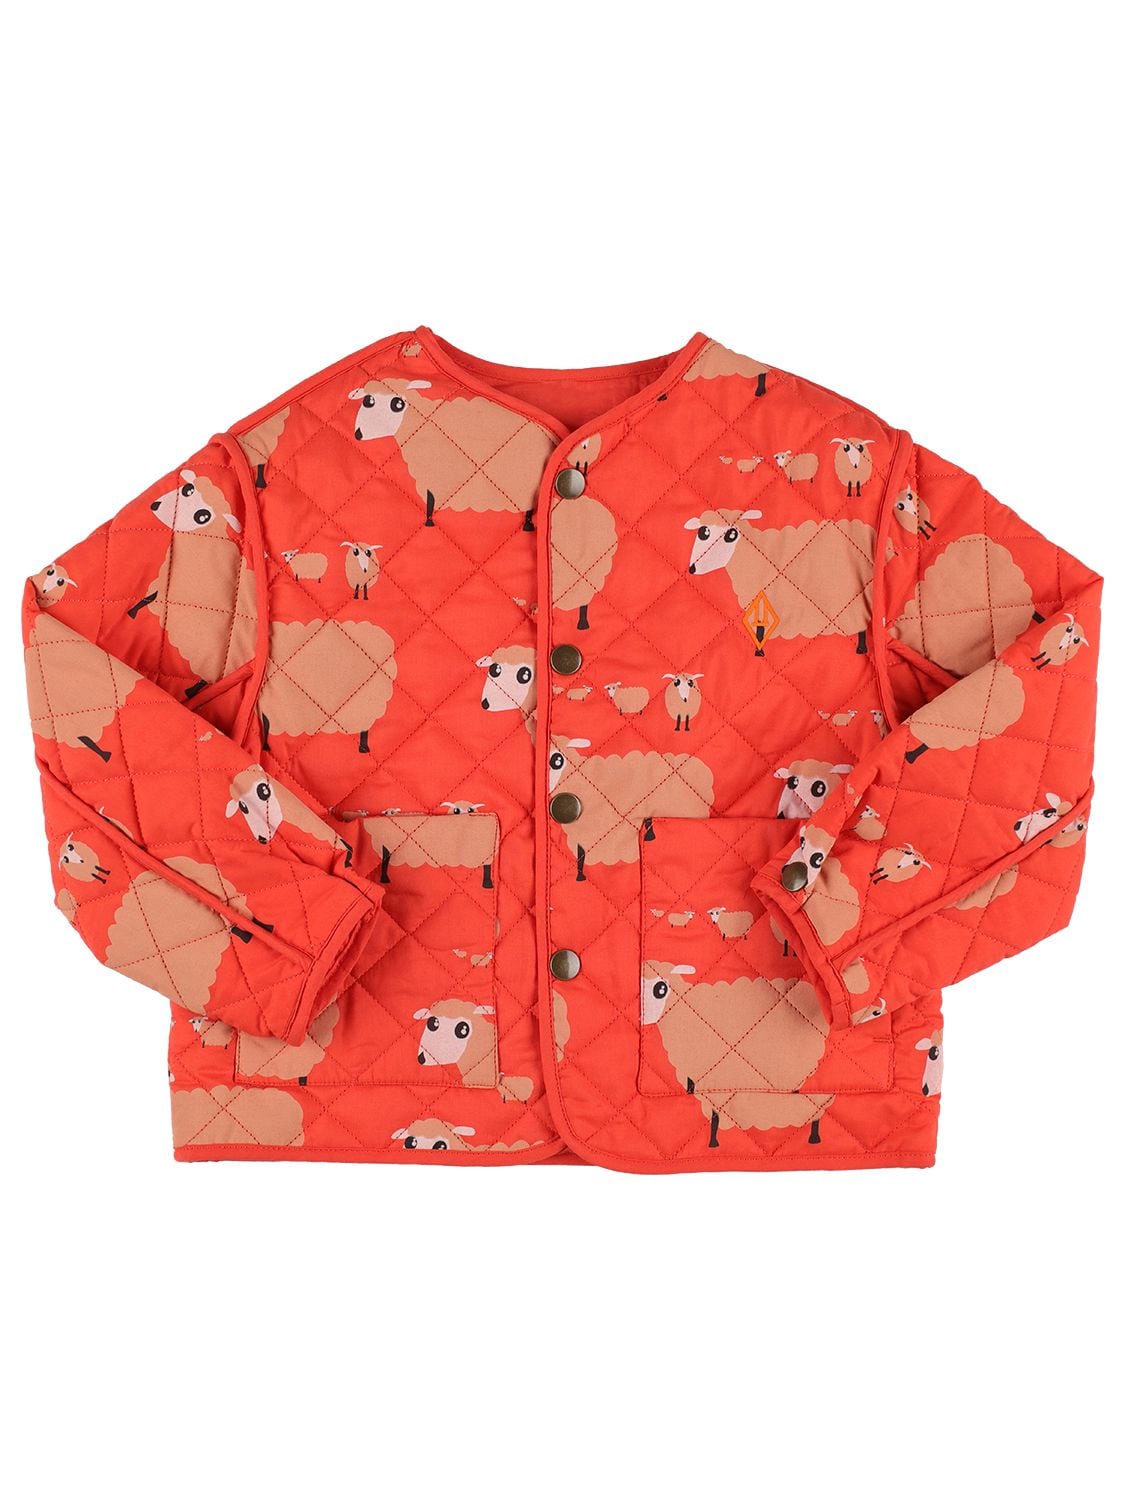 THE ANIMALS OBSERVATORY SHEEP PRINT REVERSIBLE COTTON JACKET